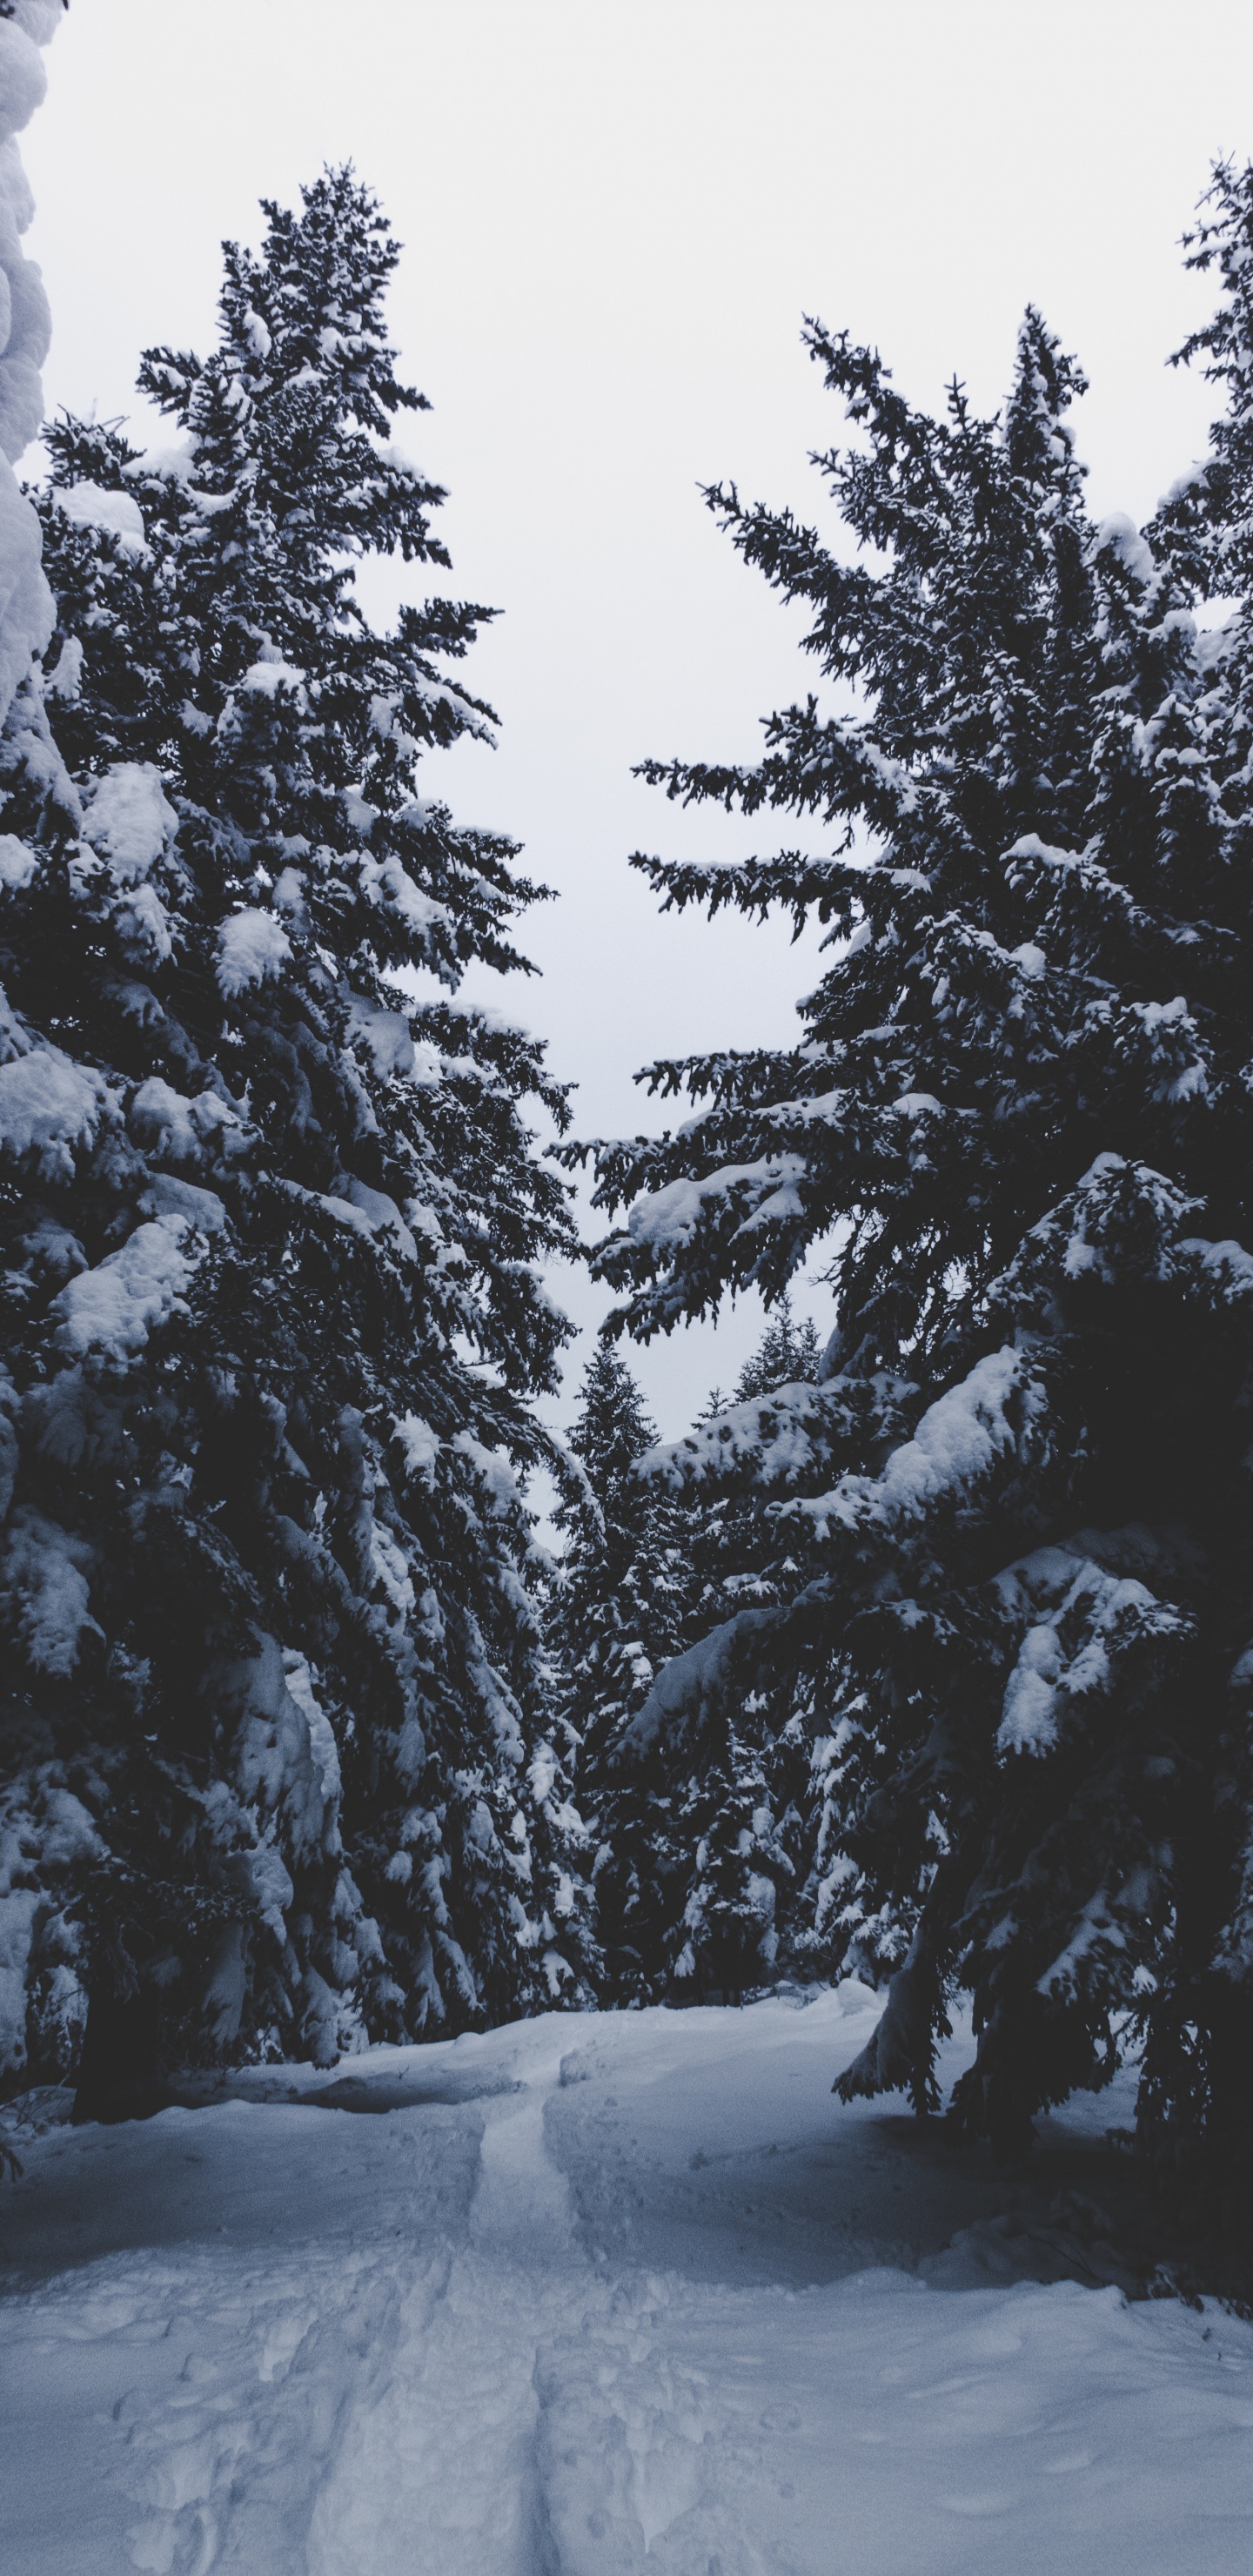 Neige, Hiver, Congélation, Plantes Ligneuses, Sapin. Wallpaper in 1440x2960 Resolution